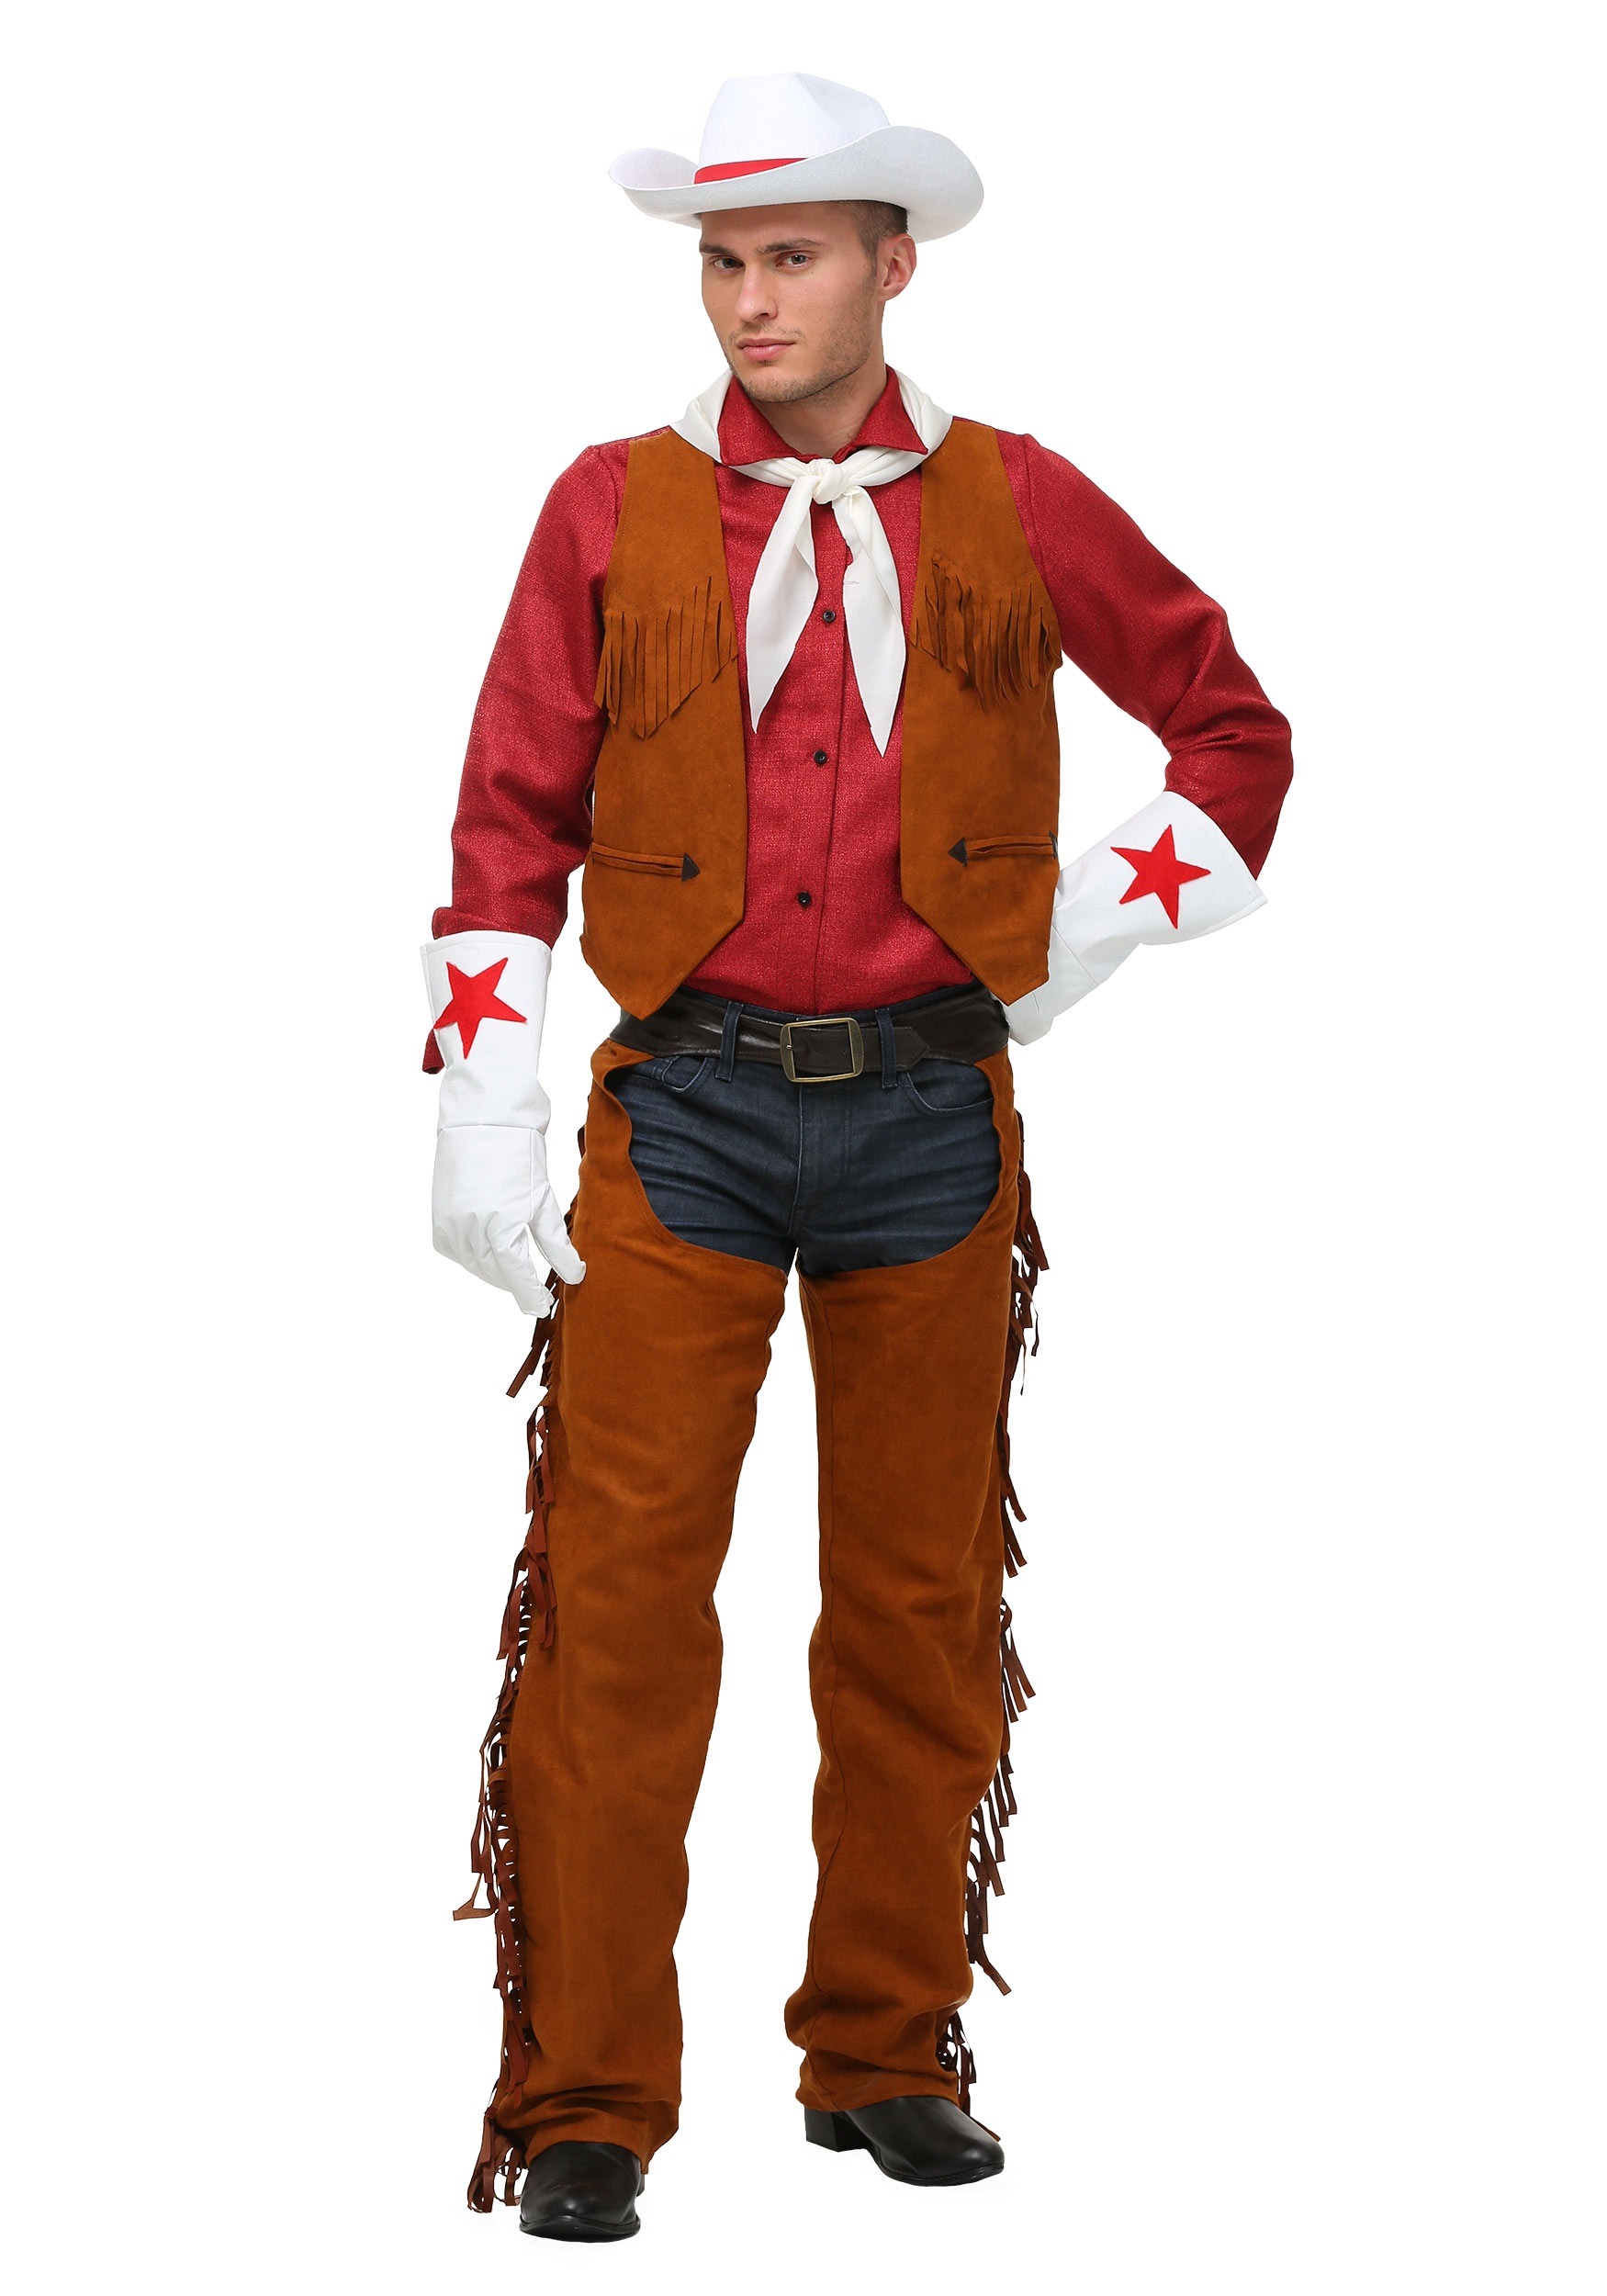 Exclusive Adult Rodeo Cowboy Costume